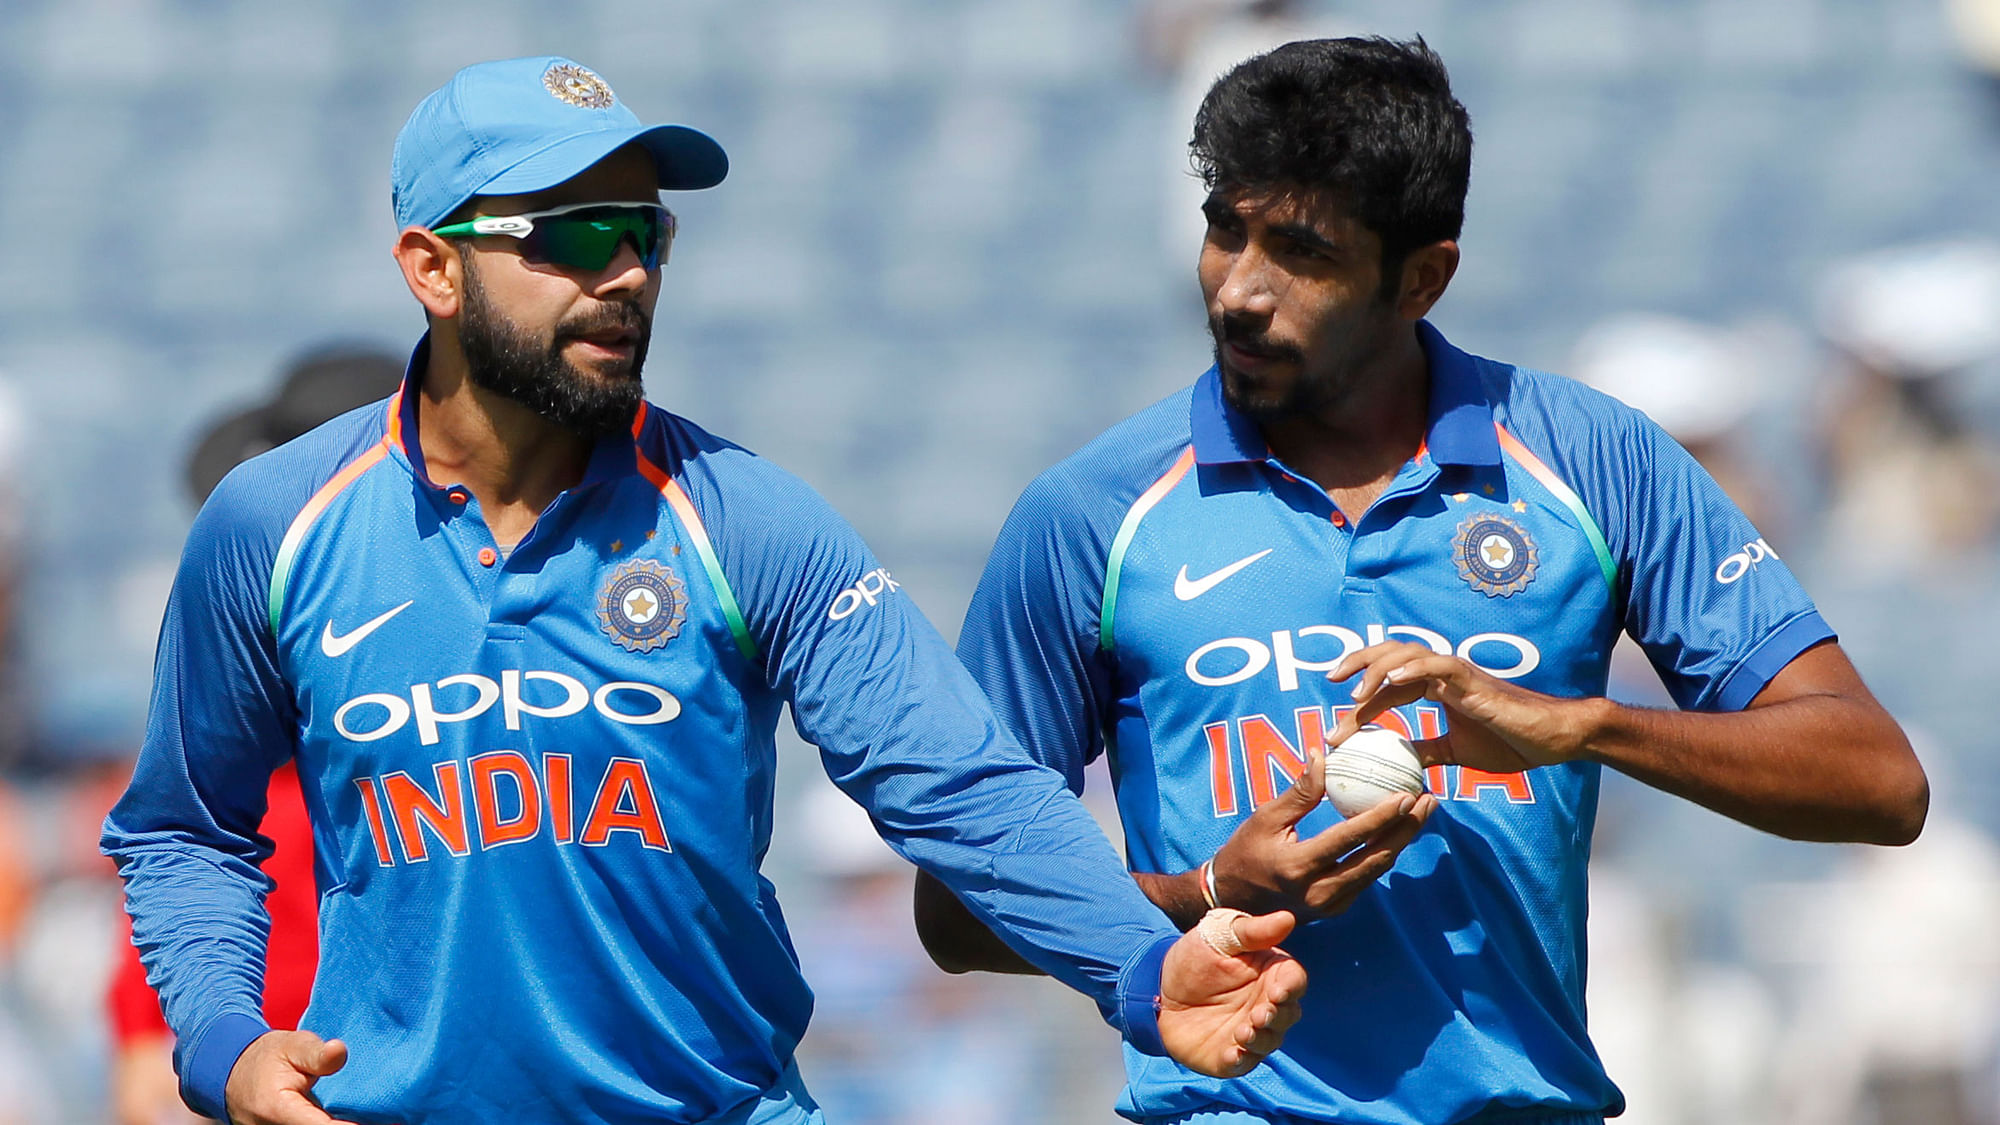 Virat Kohli and Jasprit Bumrah are likely to be rested from the limited-overs leg of India’s series against West Indies after the World Cup.